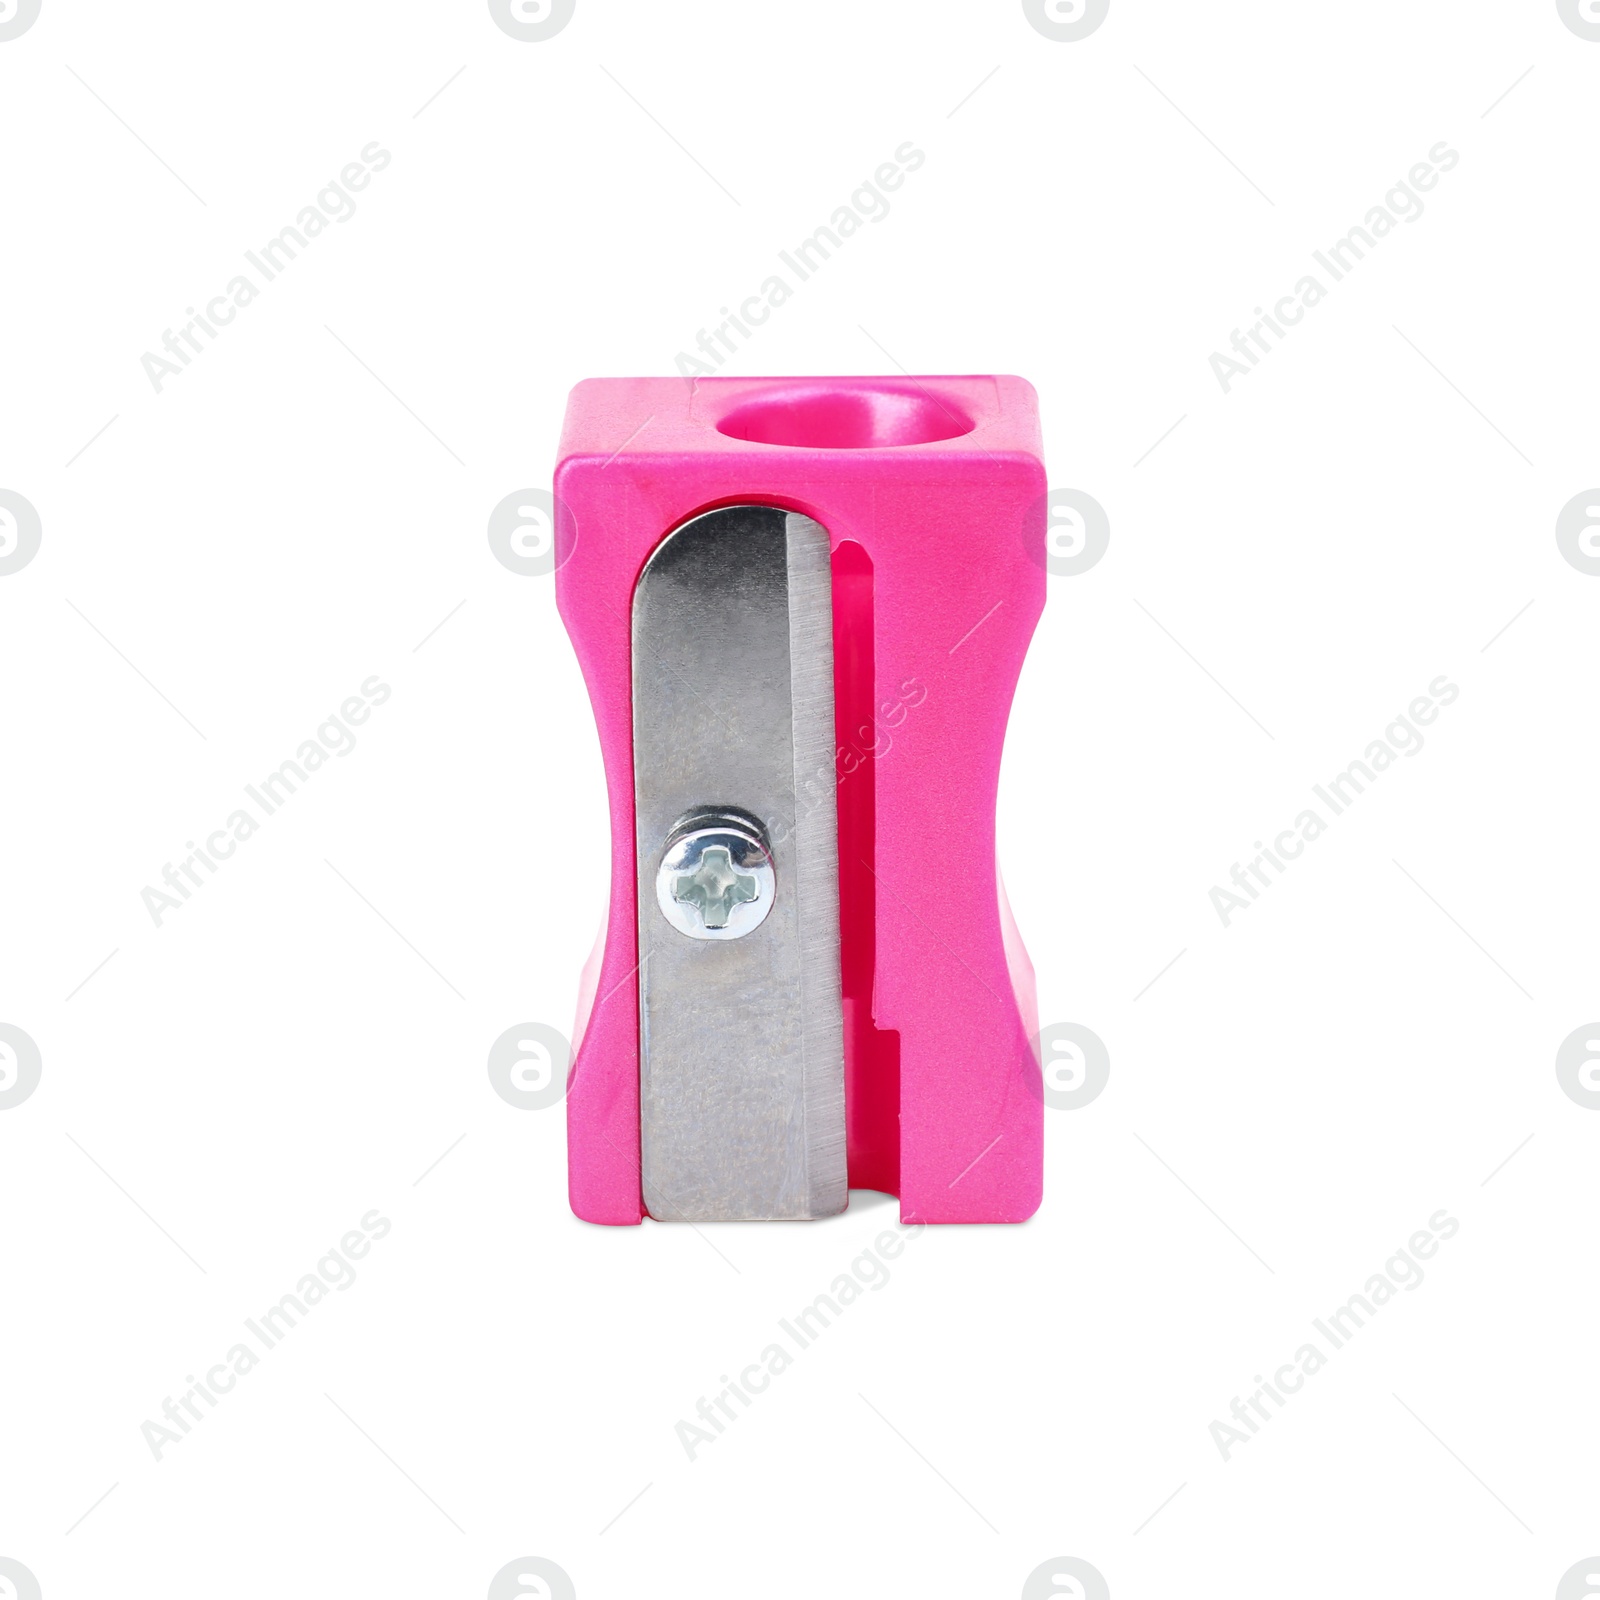 Photo of Plastic pink pencil sharpener isolated on white